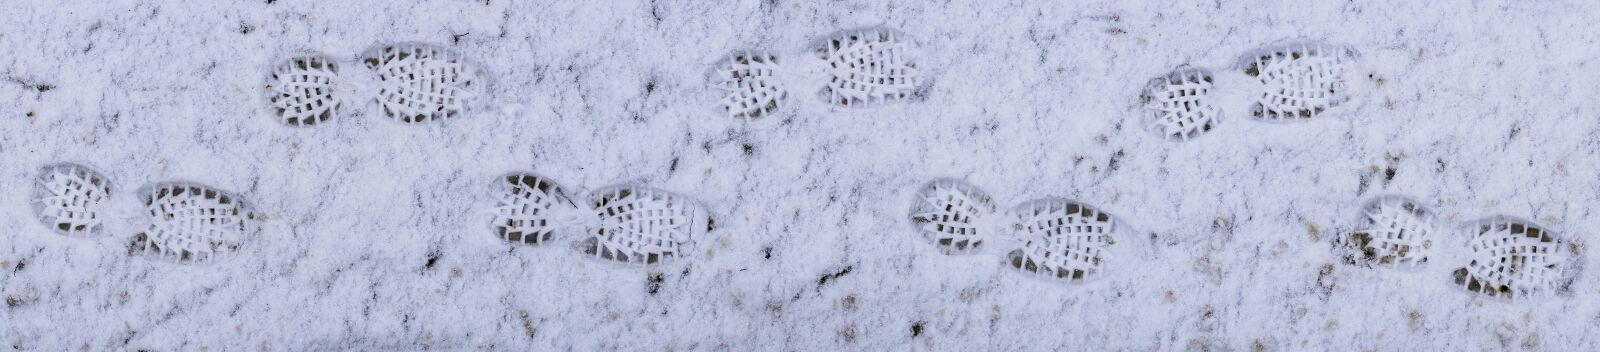 Sony a6300 sample photo. Snow, footprints, traces photography